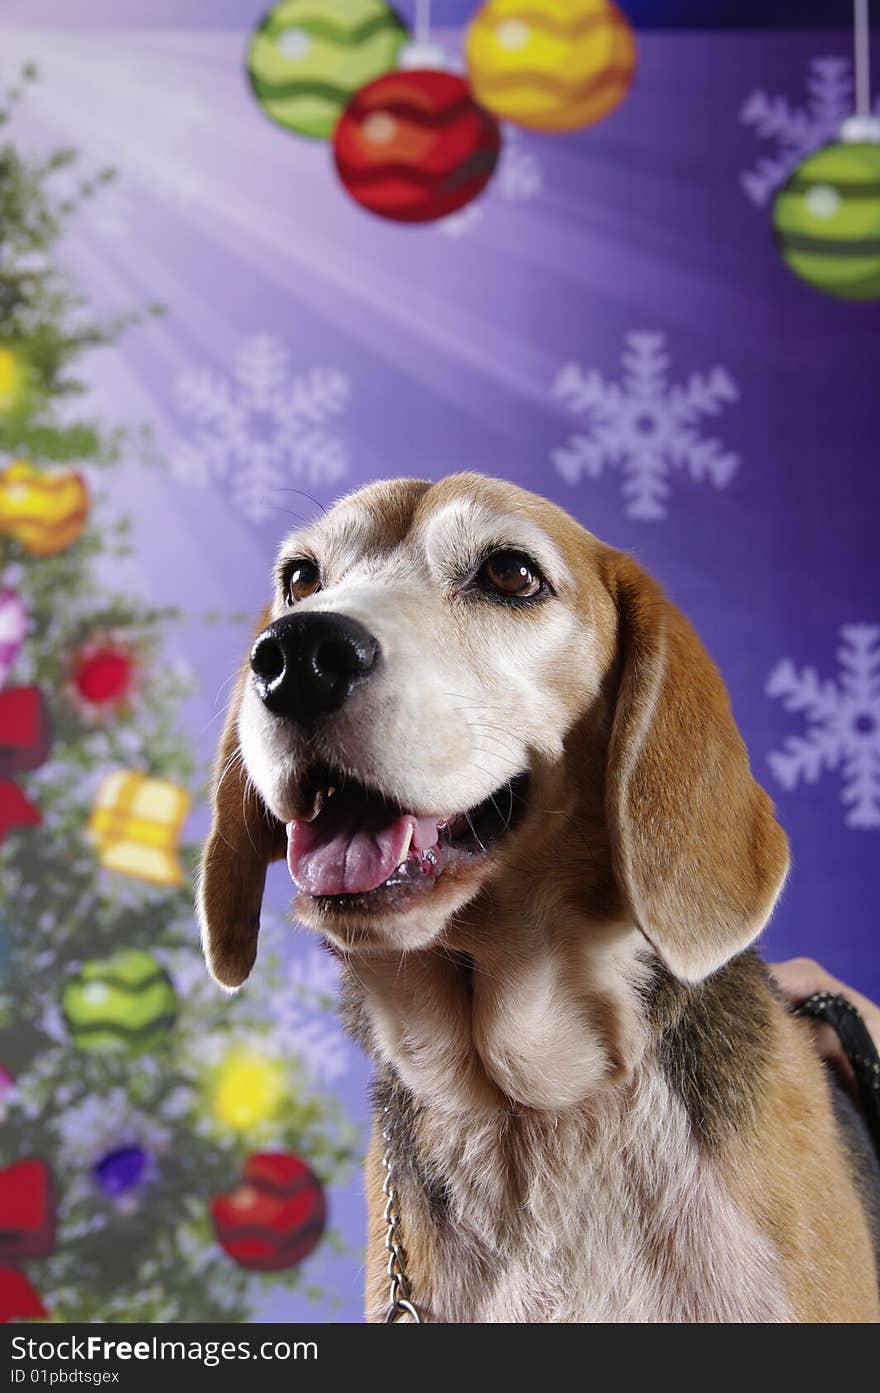 A Beagle on a Christmas themed background that seems to be shined upon by a heavenly light. A Beagle on a Christmas themed background that seems to be shined upon by a heavenly light.